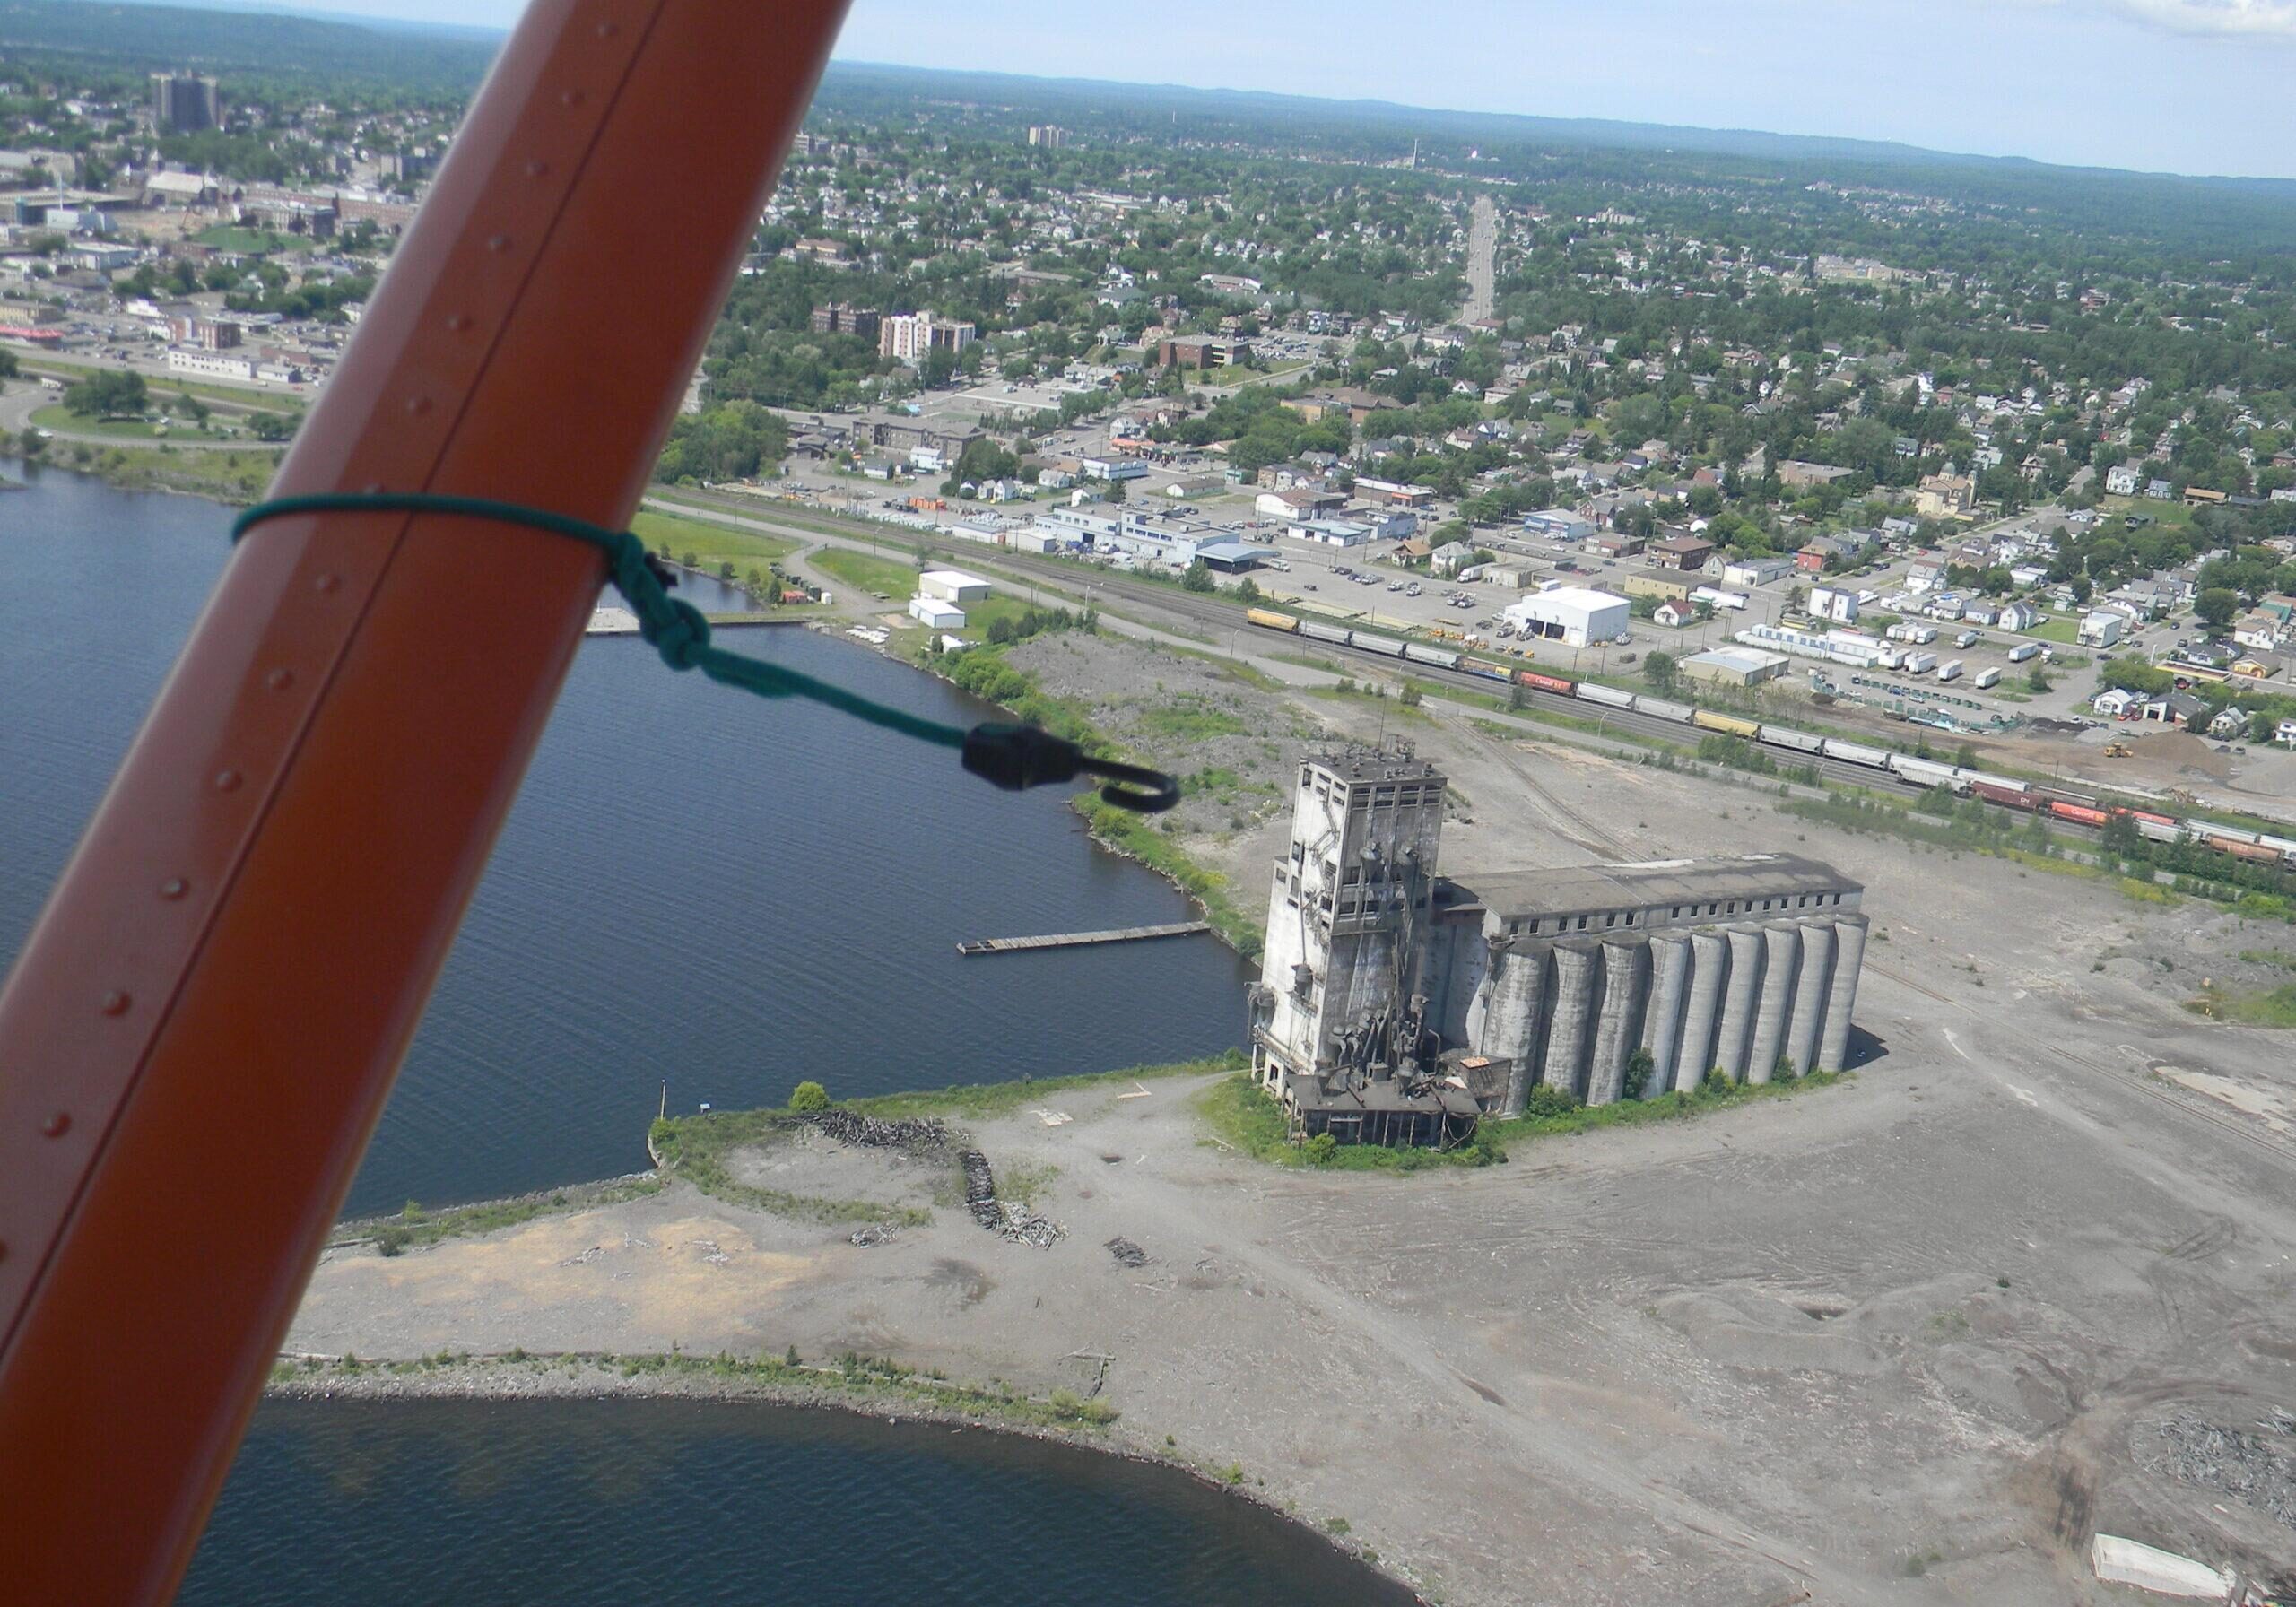 birds eye view of elevator, city, and port